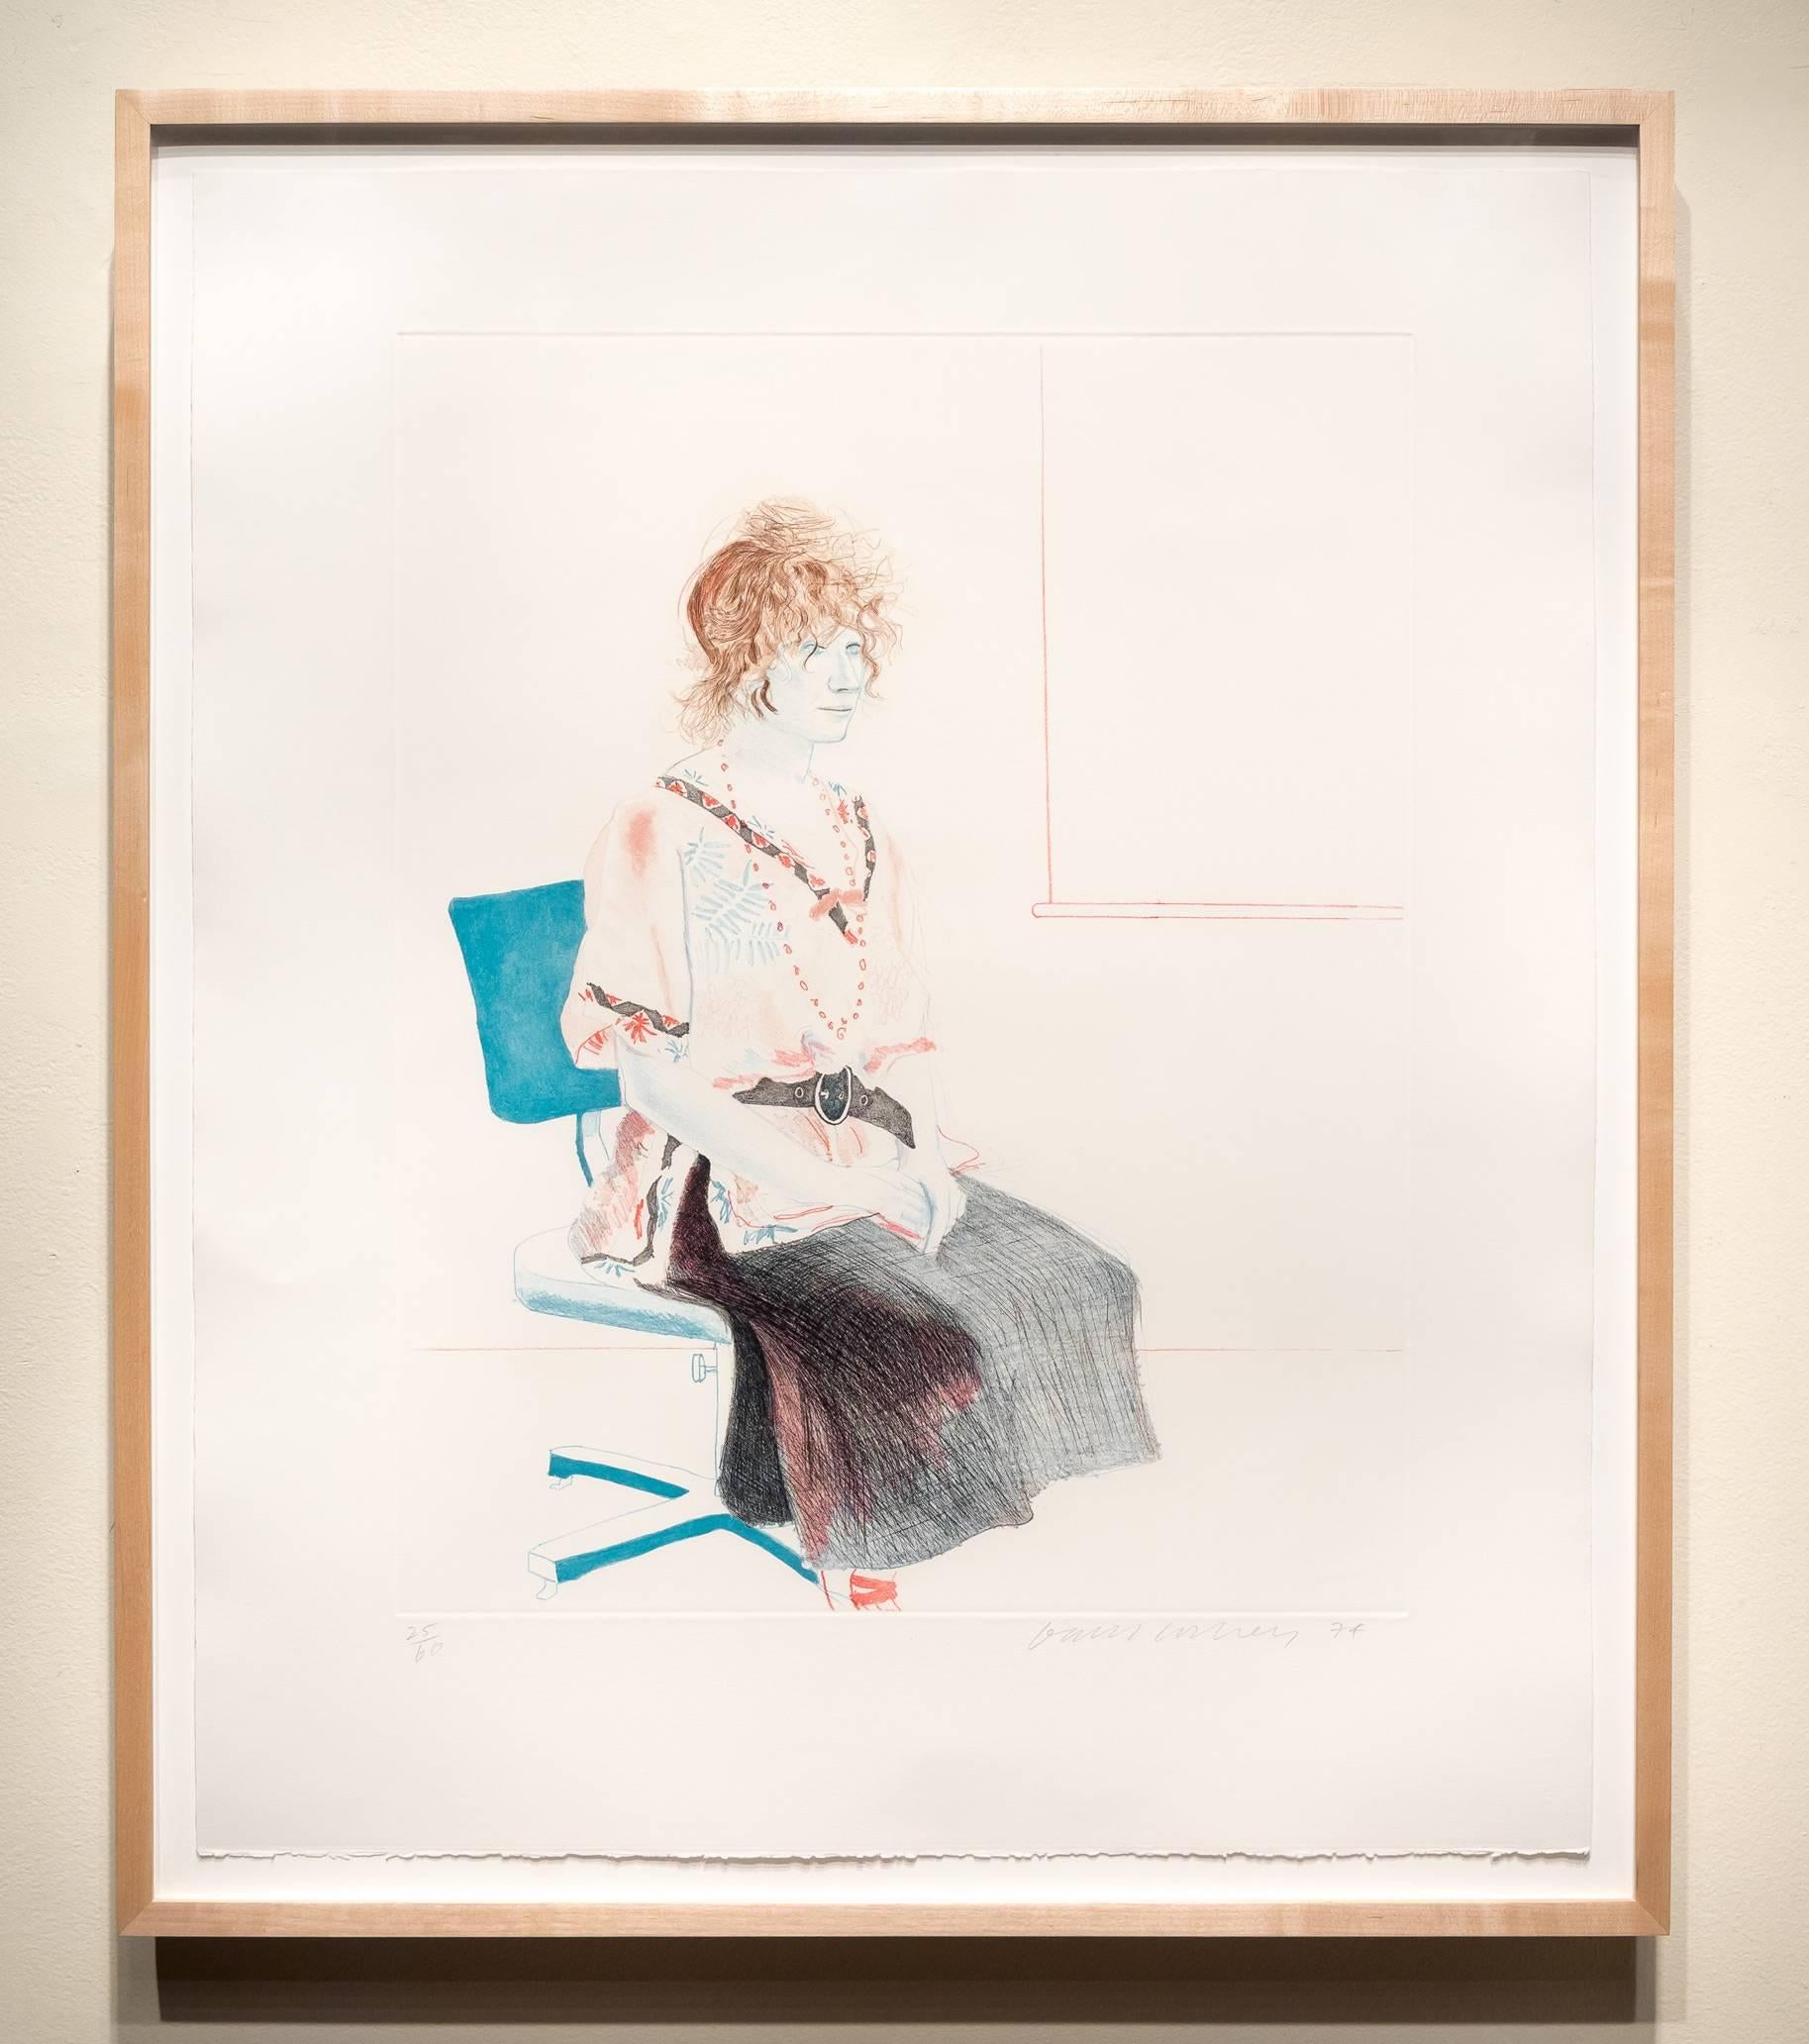 Celia Seated on an Office Chair - Contemporary Print by David Hockney